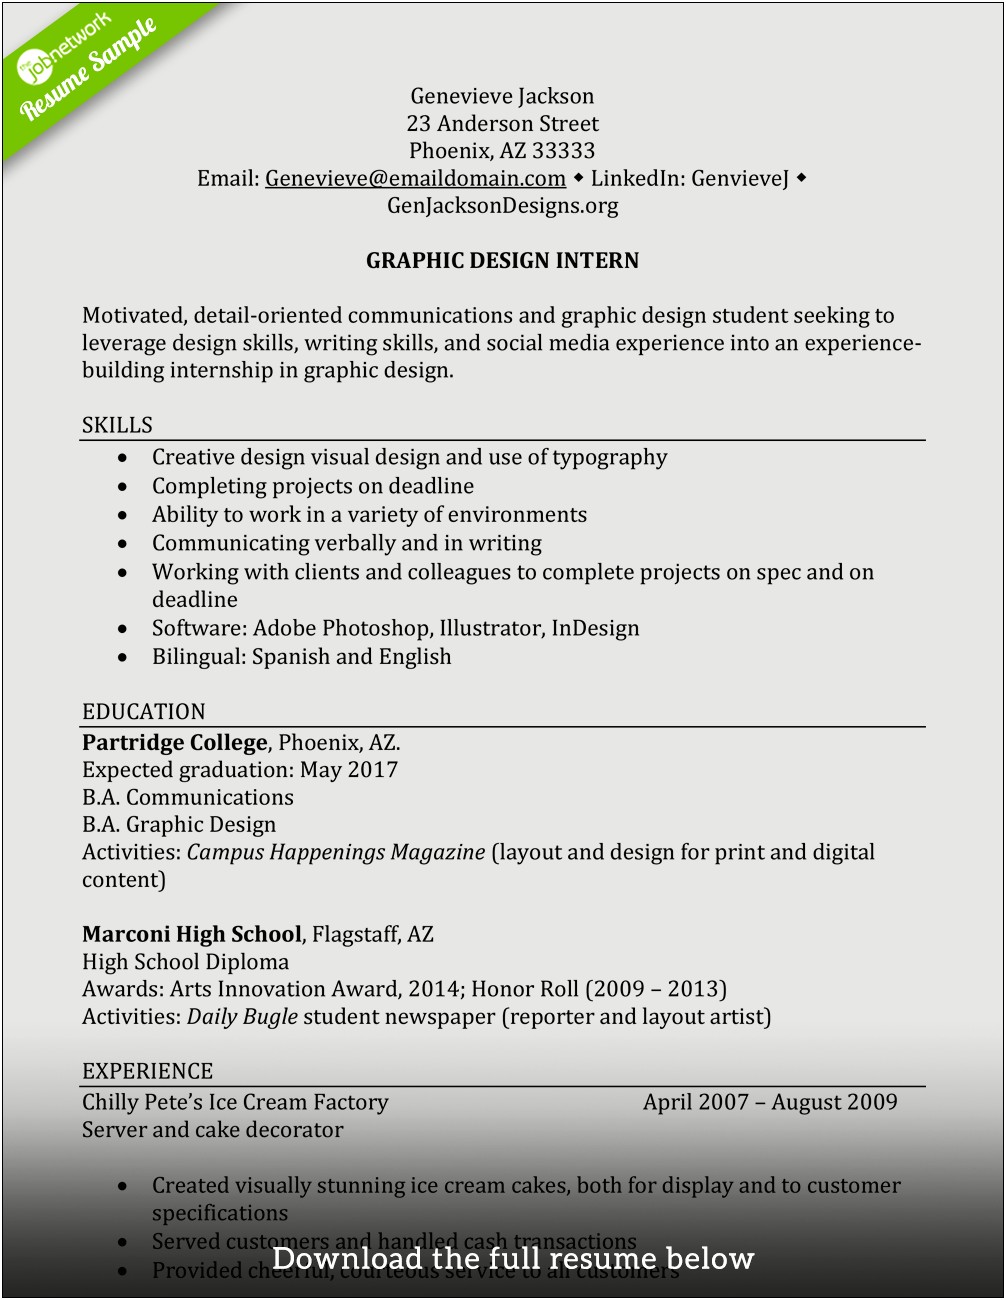 Resume Examples Without Work Experience